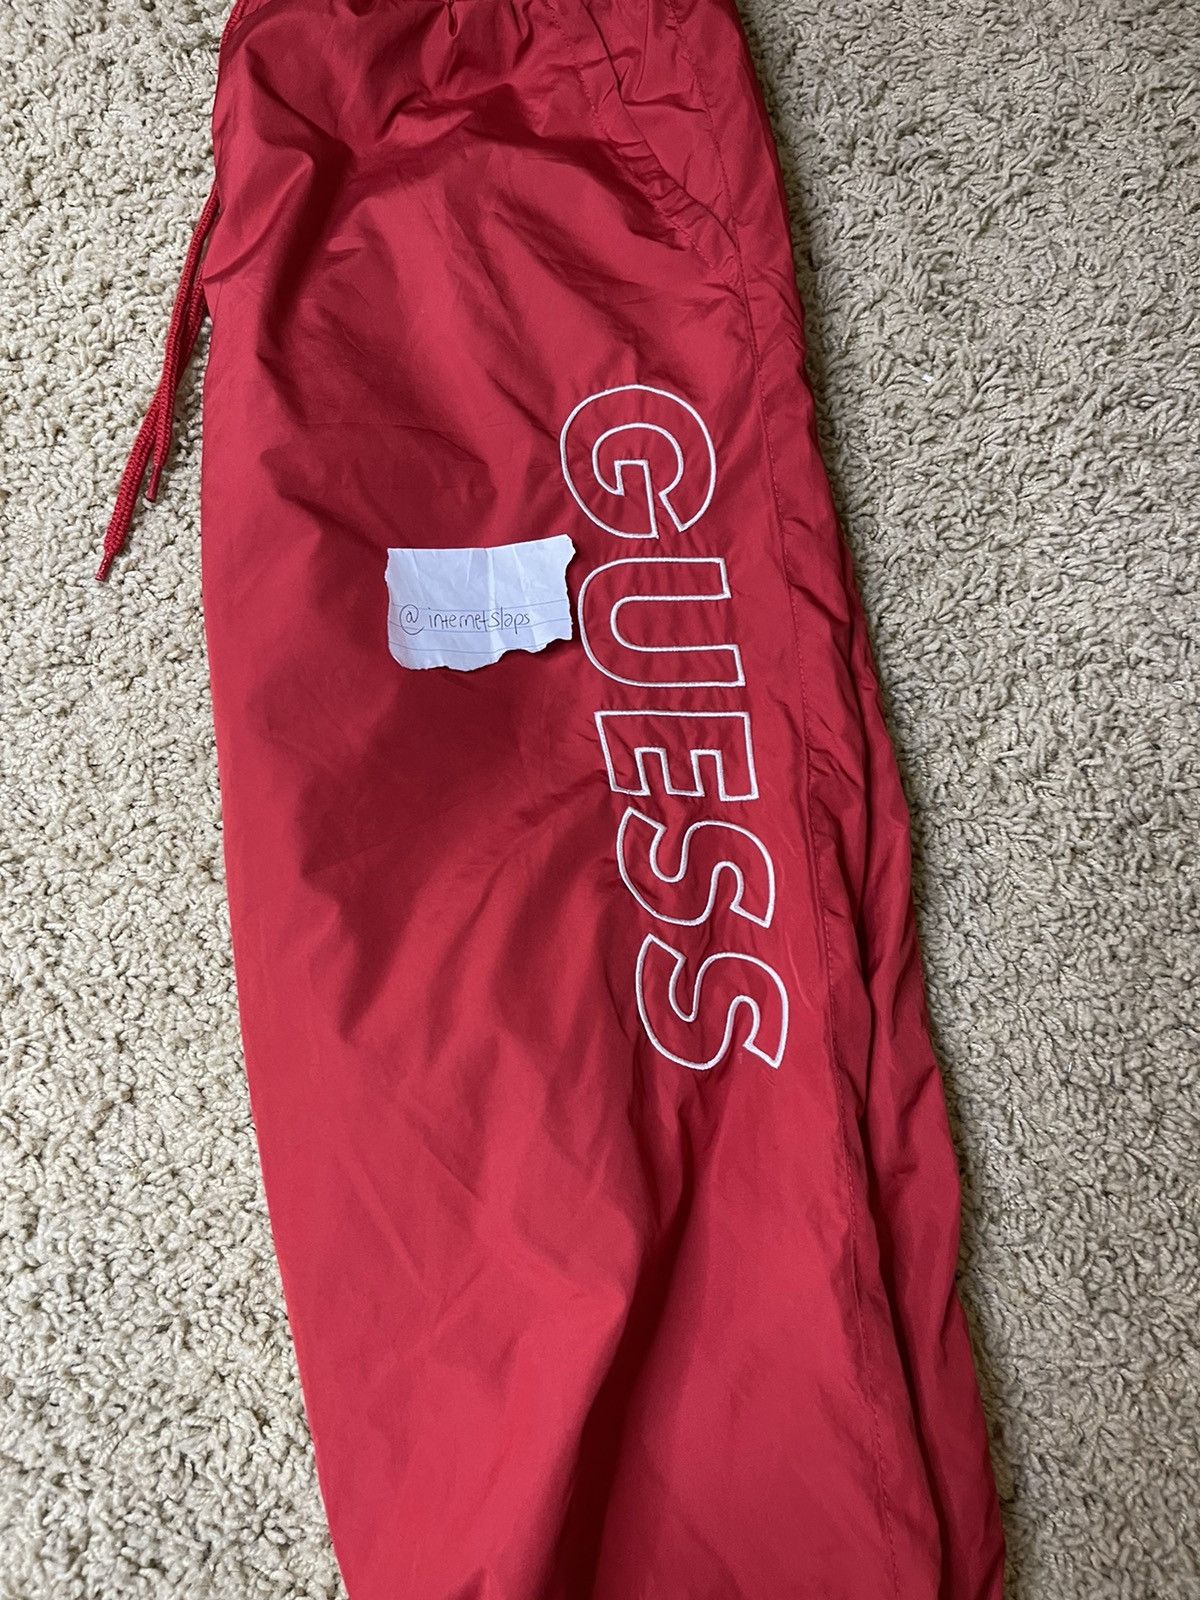 Guess Red GUESS tracksuit pant Size US 32 / EU 48 - 2 Preview